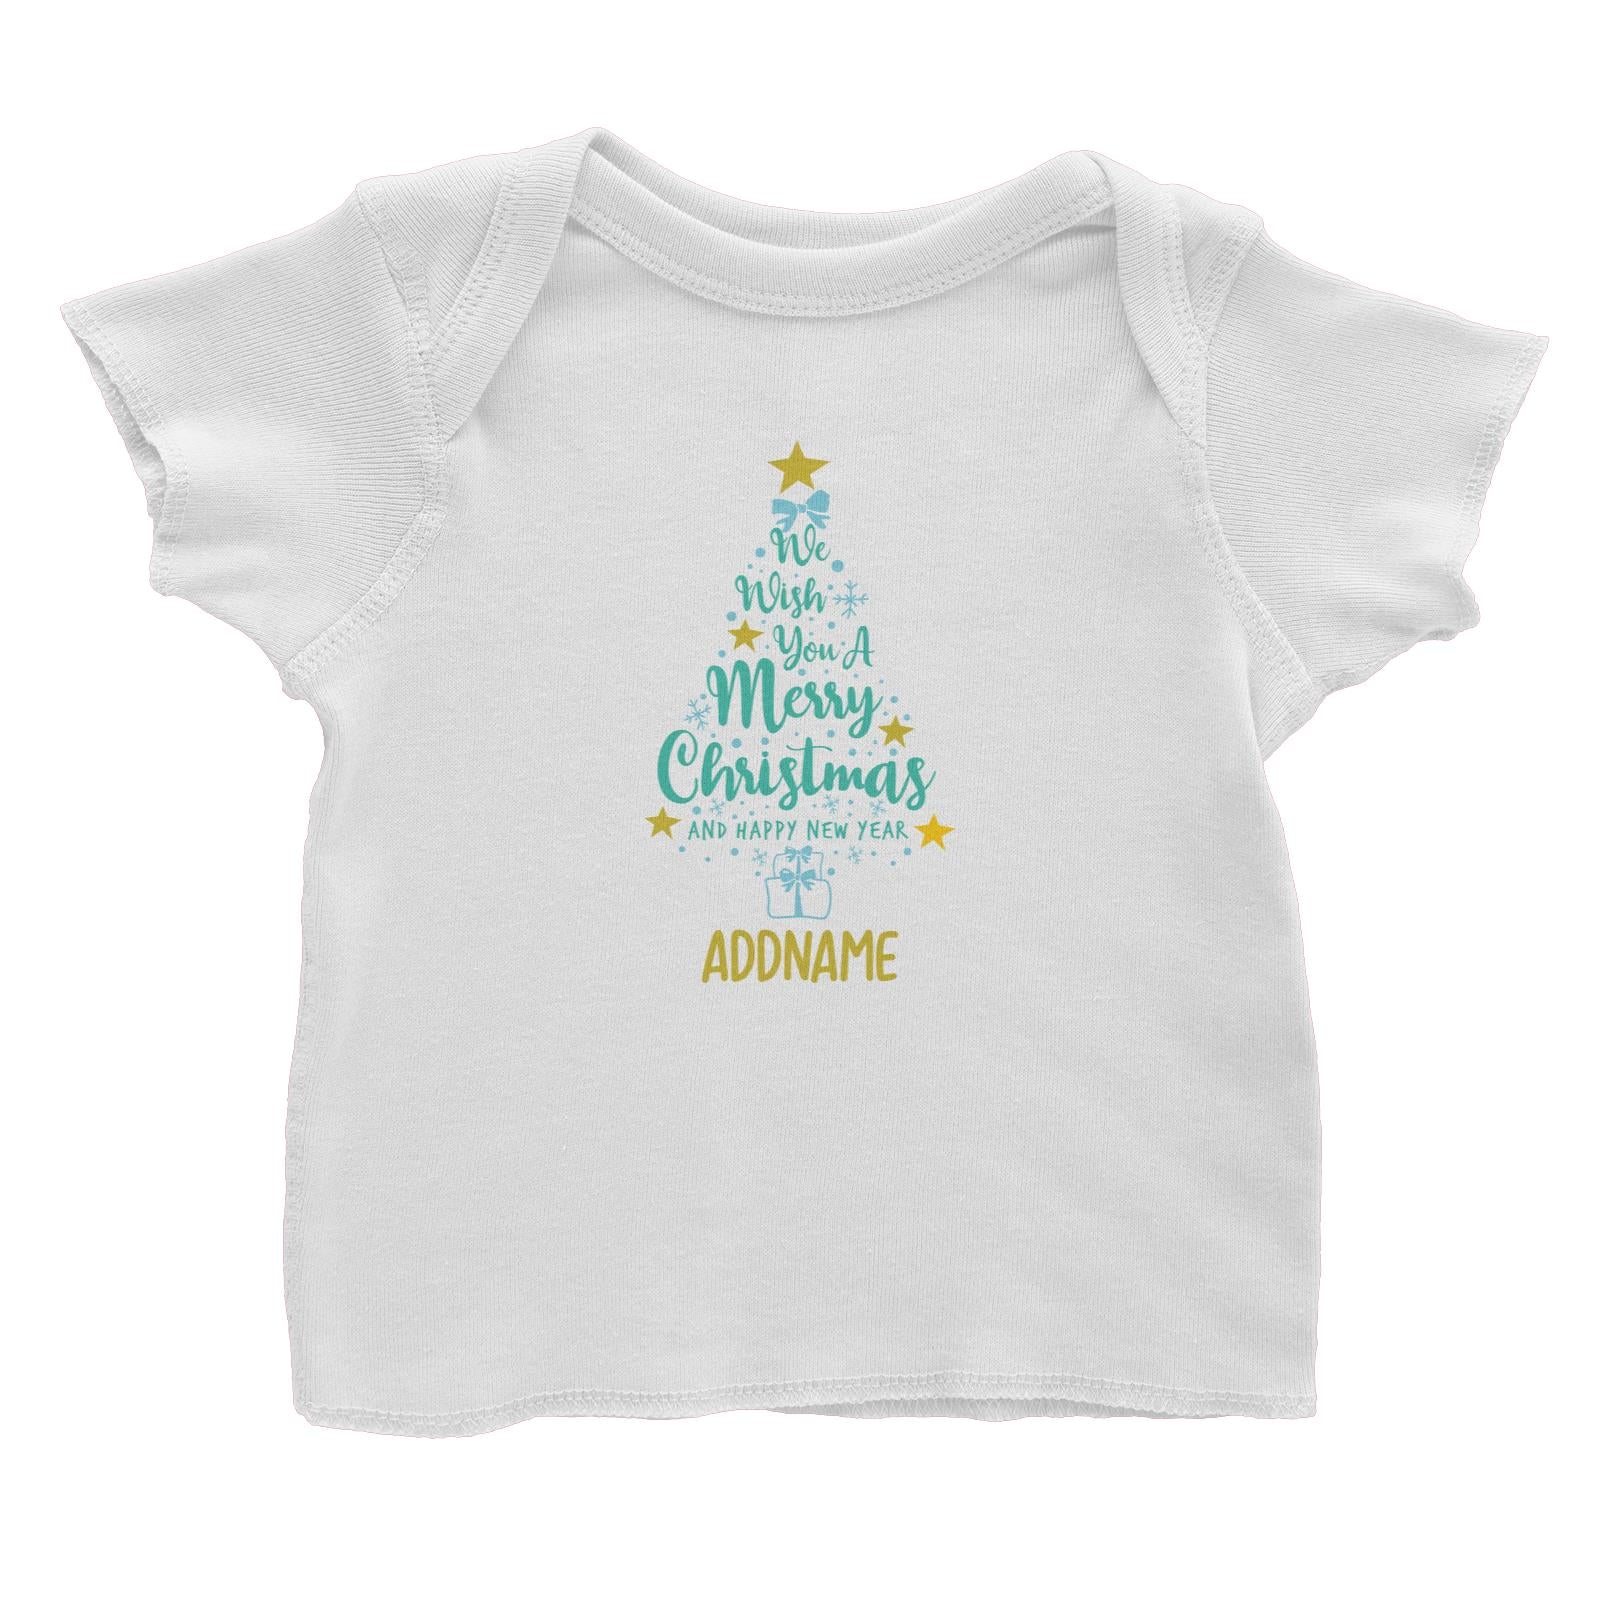 Xmas We Wish You A Merry Christmas and A Happy New Year Baby T-Shirt